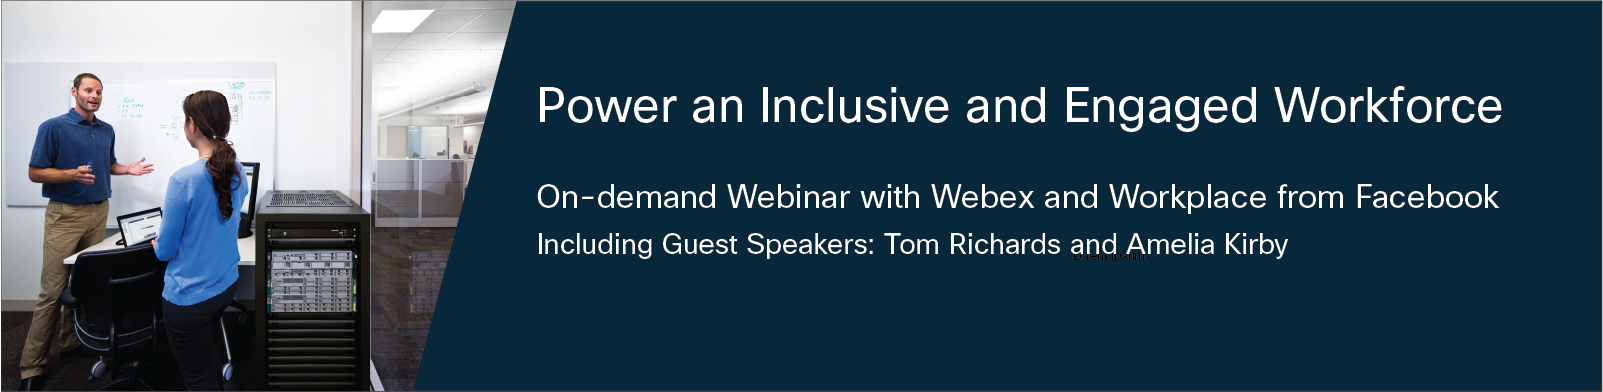 Cover image of Power an inclusive and engaged workforce with Webex and Workplace from Facebook